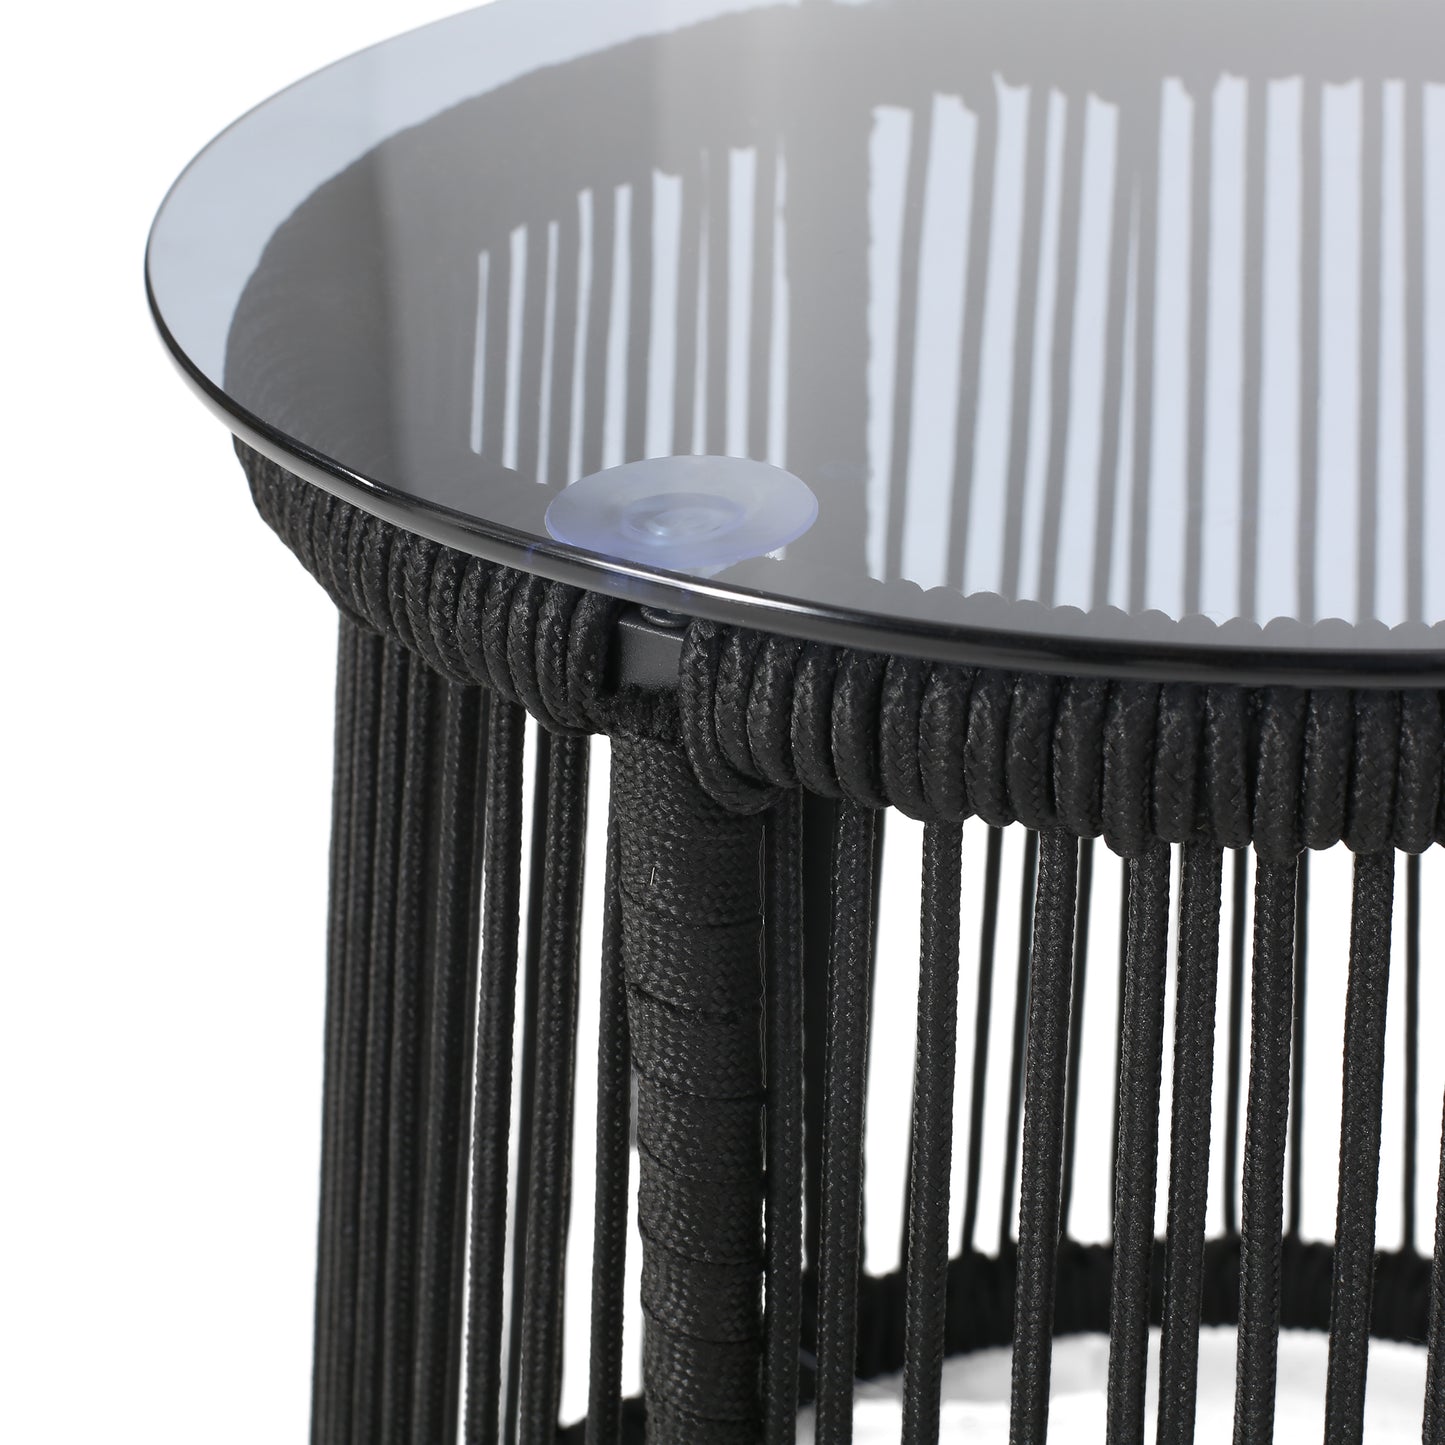 Laycee Modern Outdoor Rope Weave Side Table with Tempered Glass Top